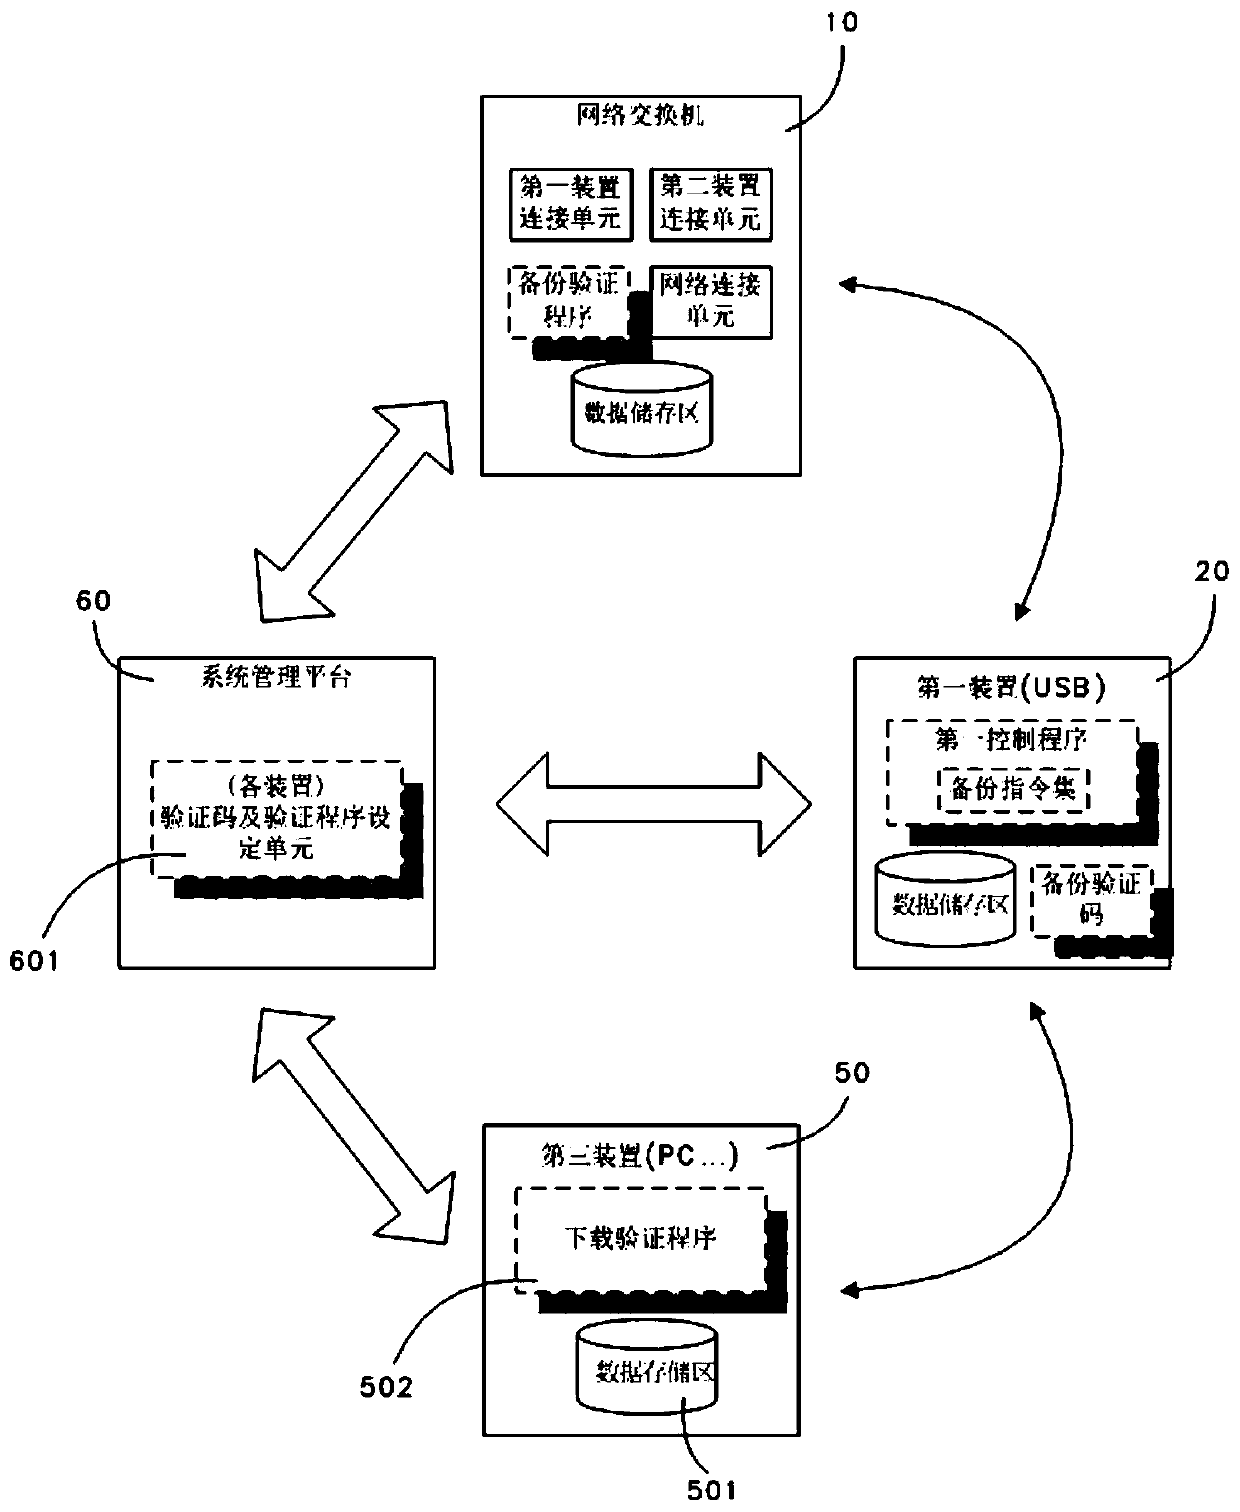 System and method for network switch to perform automatic backup of data